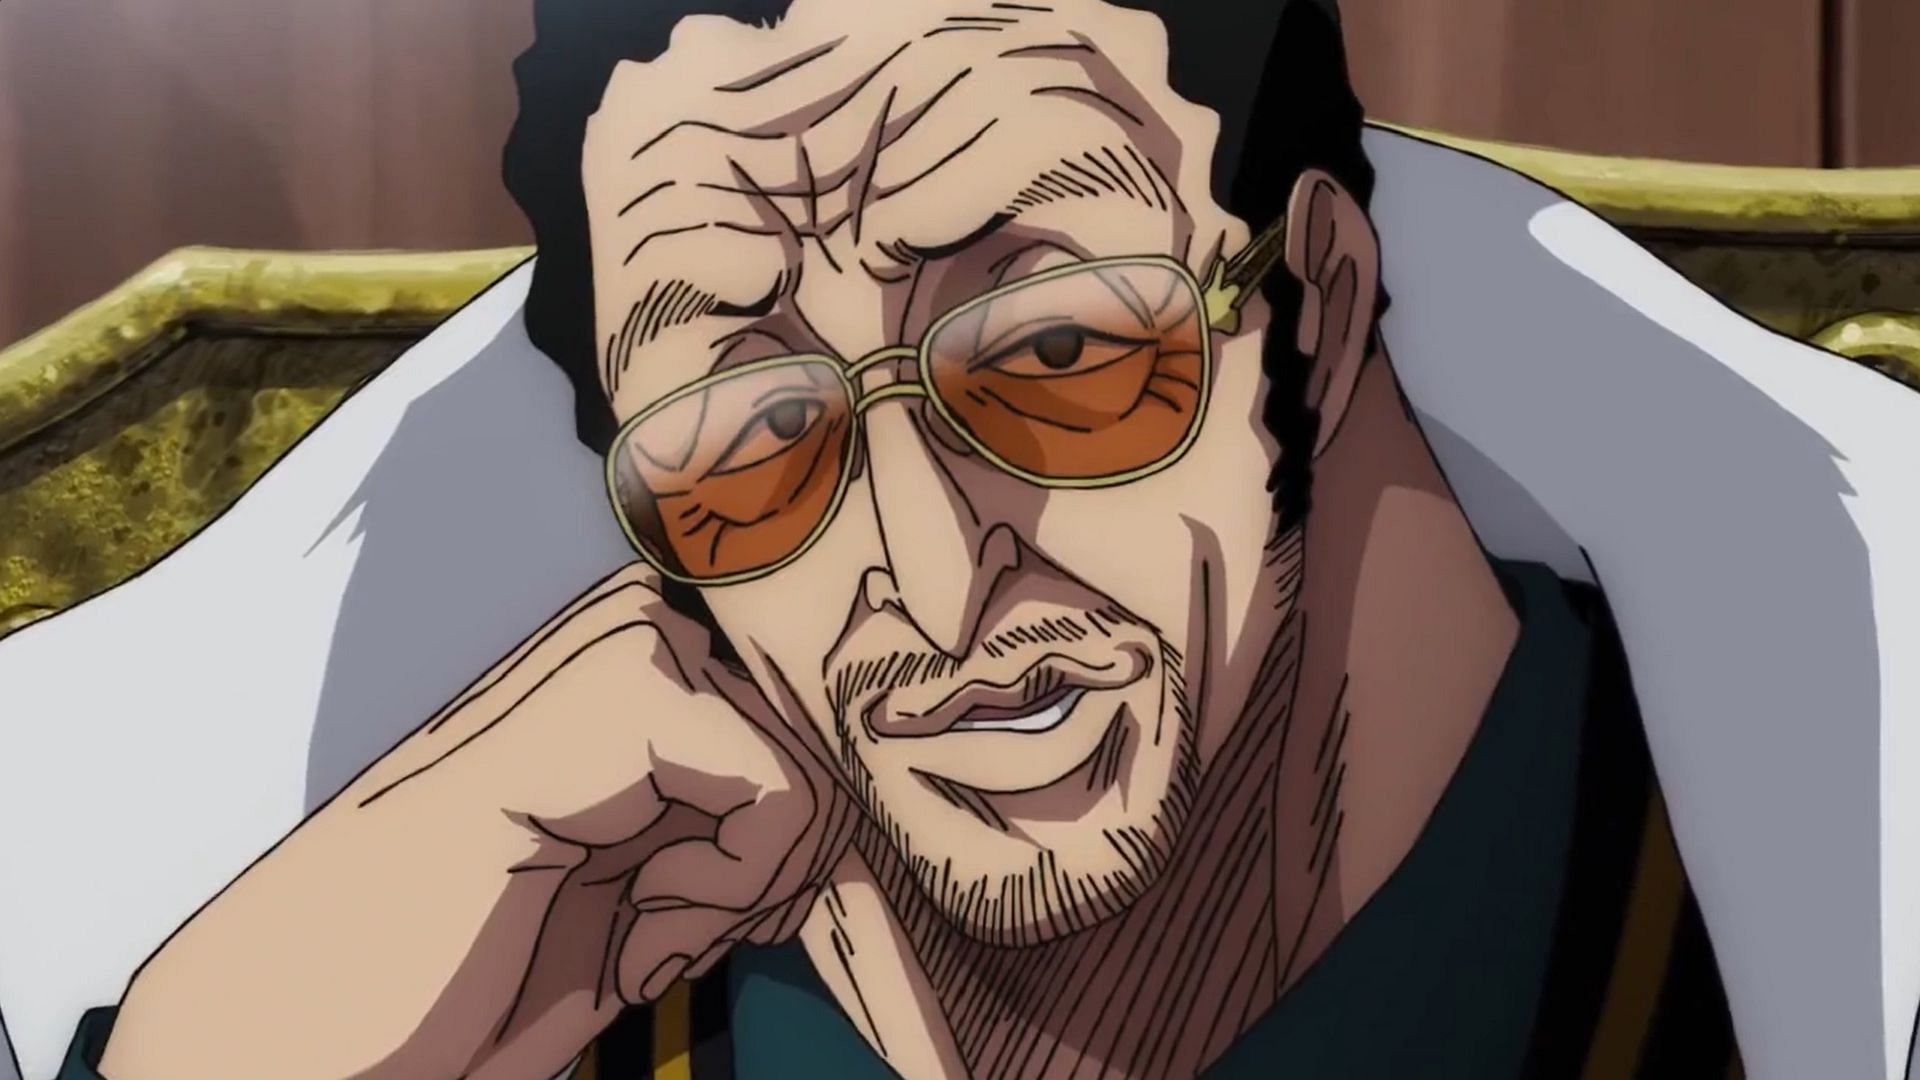 Kizaru can be brutal when the time comes (Image via Toei Animation, One Piece)